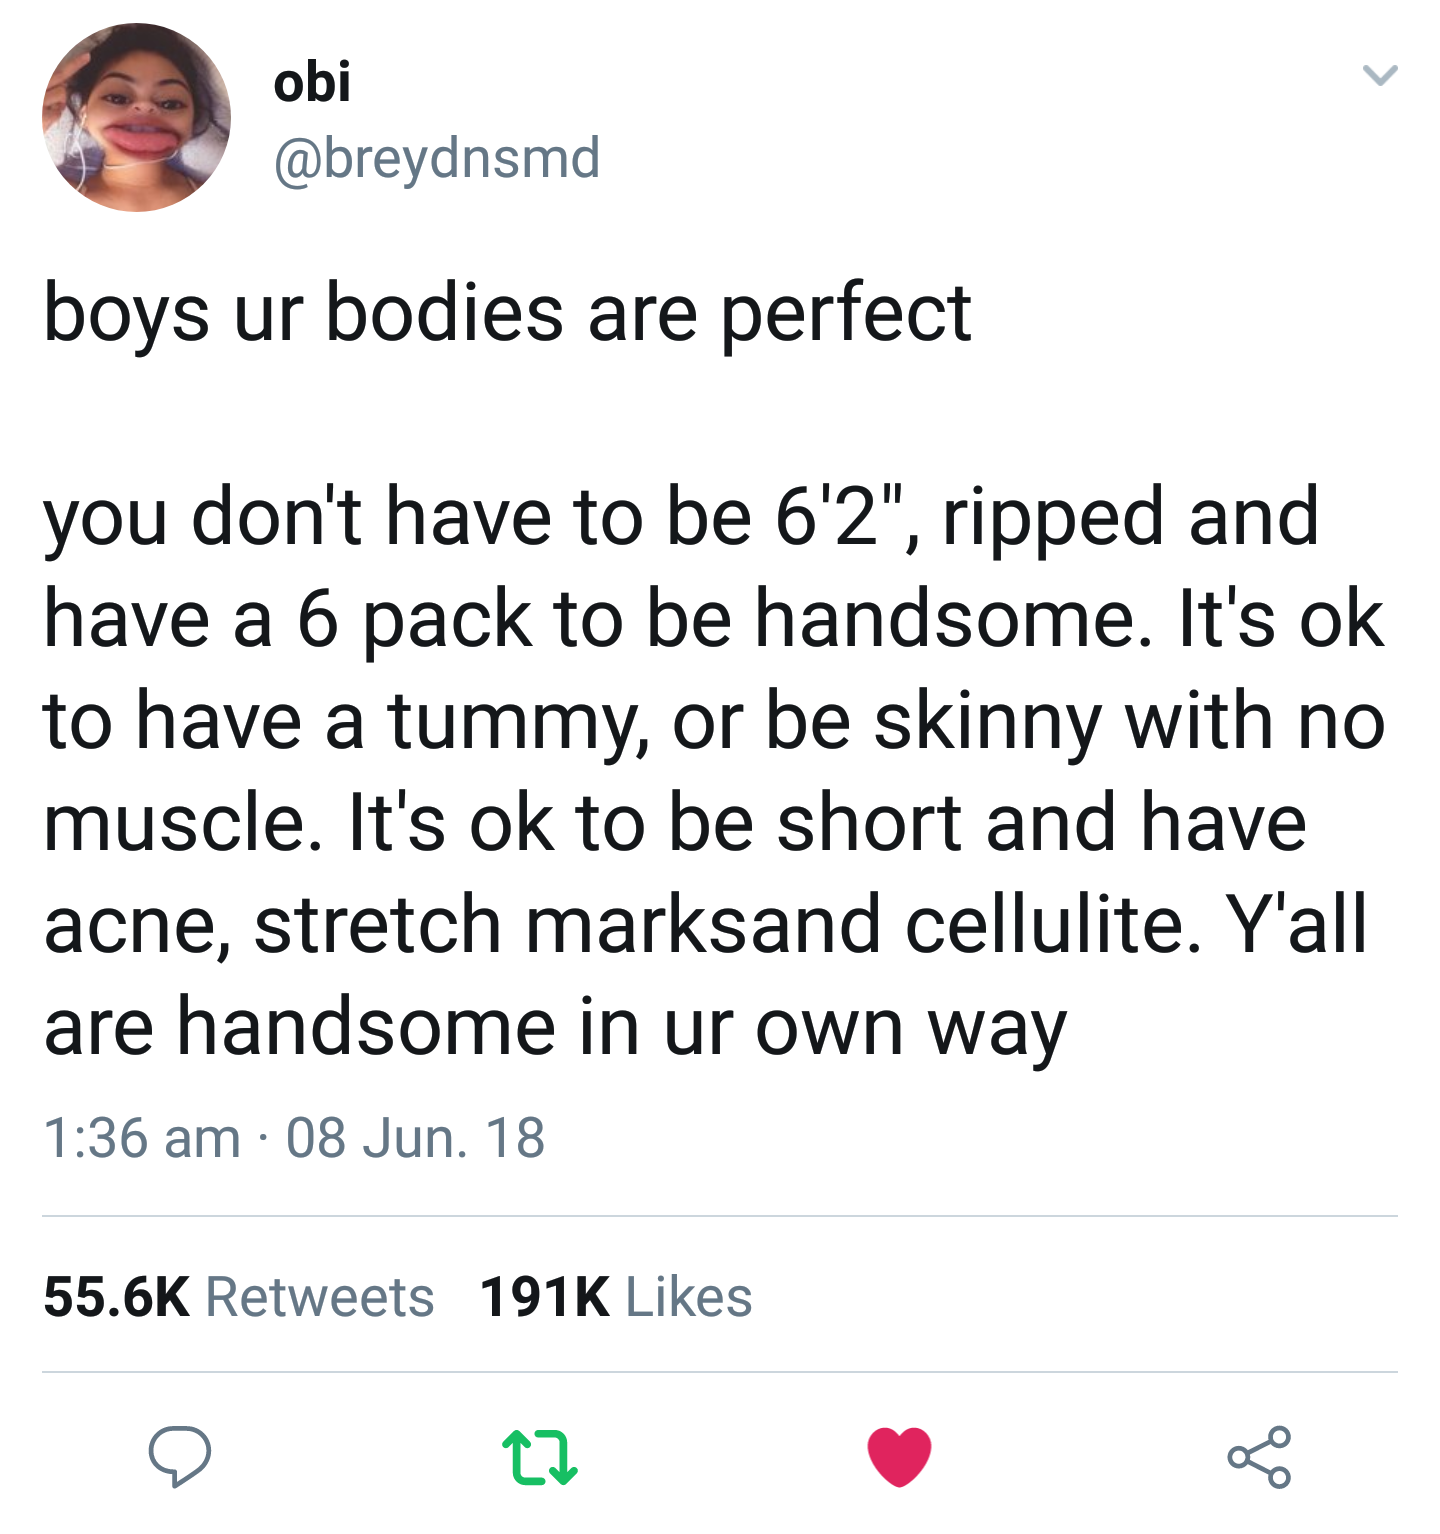 wholesome text giving men and boys positive vibes about their bodies